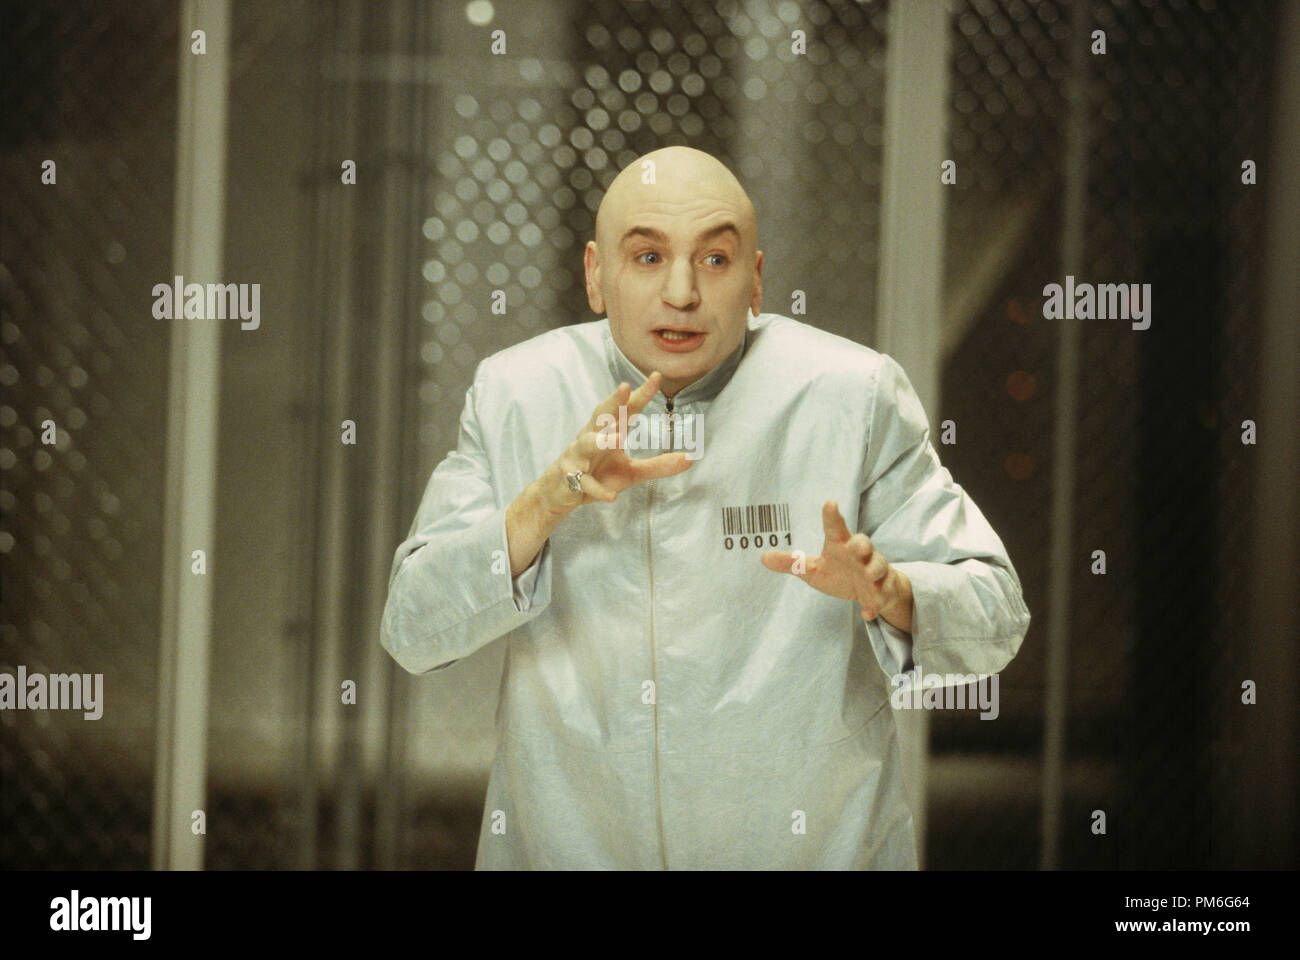 Film Still / Publicity Still from 'Austin Powers in Goldmember' Mike Myers as Dr. Evil © 2002 New Line Producitons Photo Credit: Melinda Sue Gordon Stock Photo